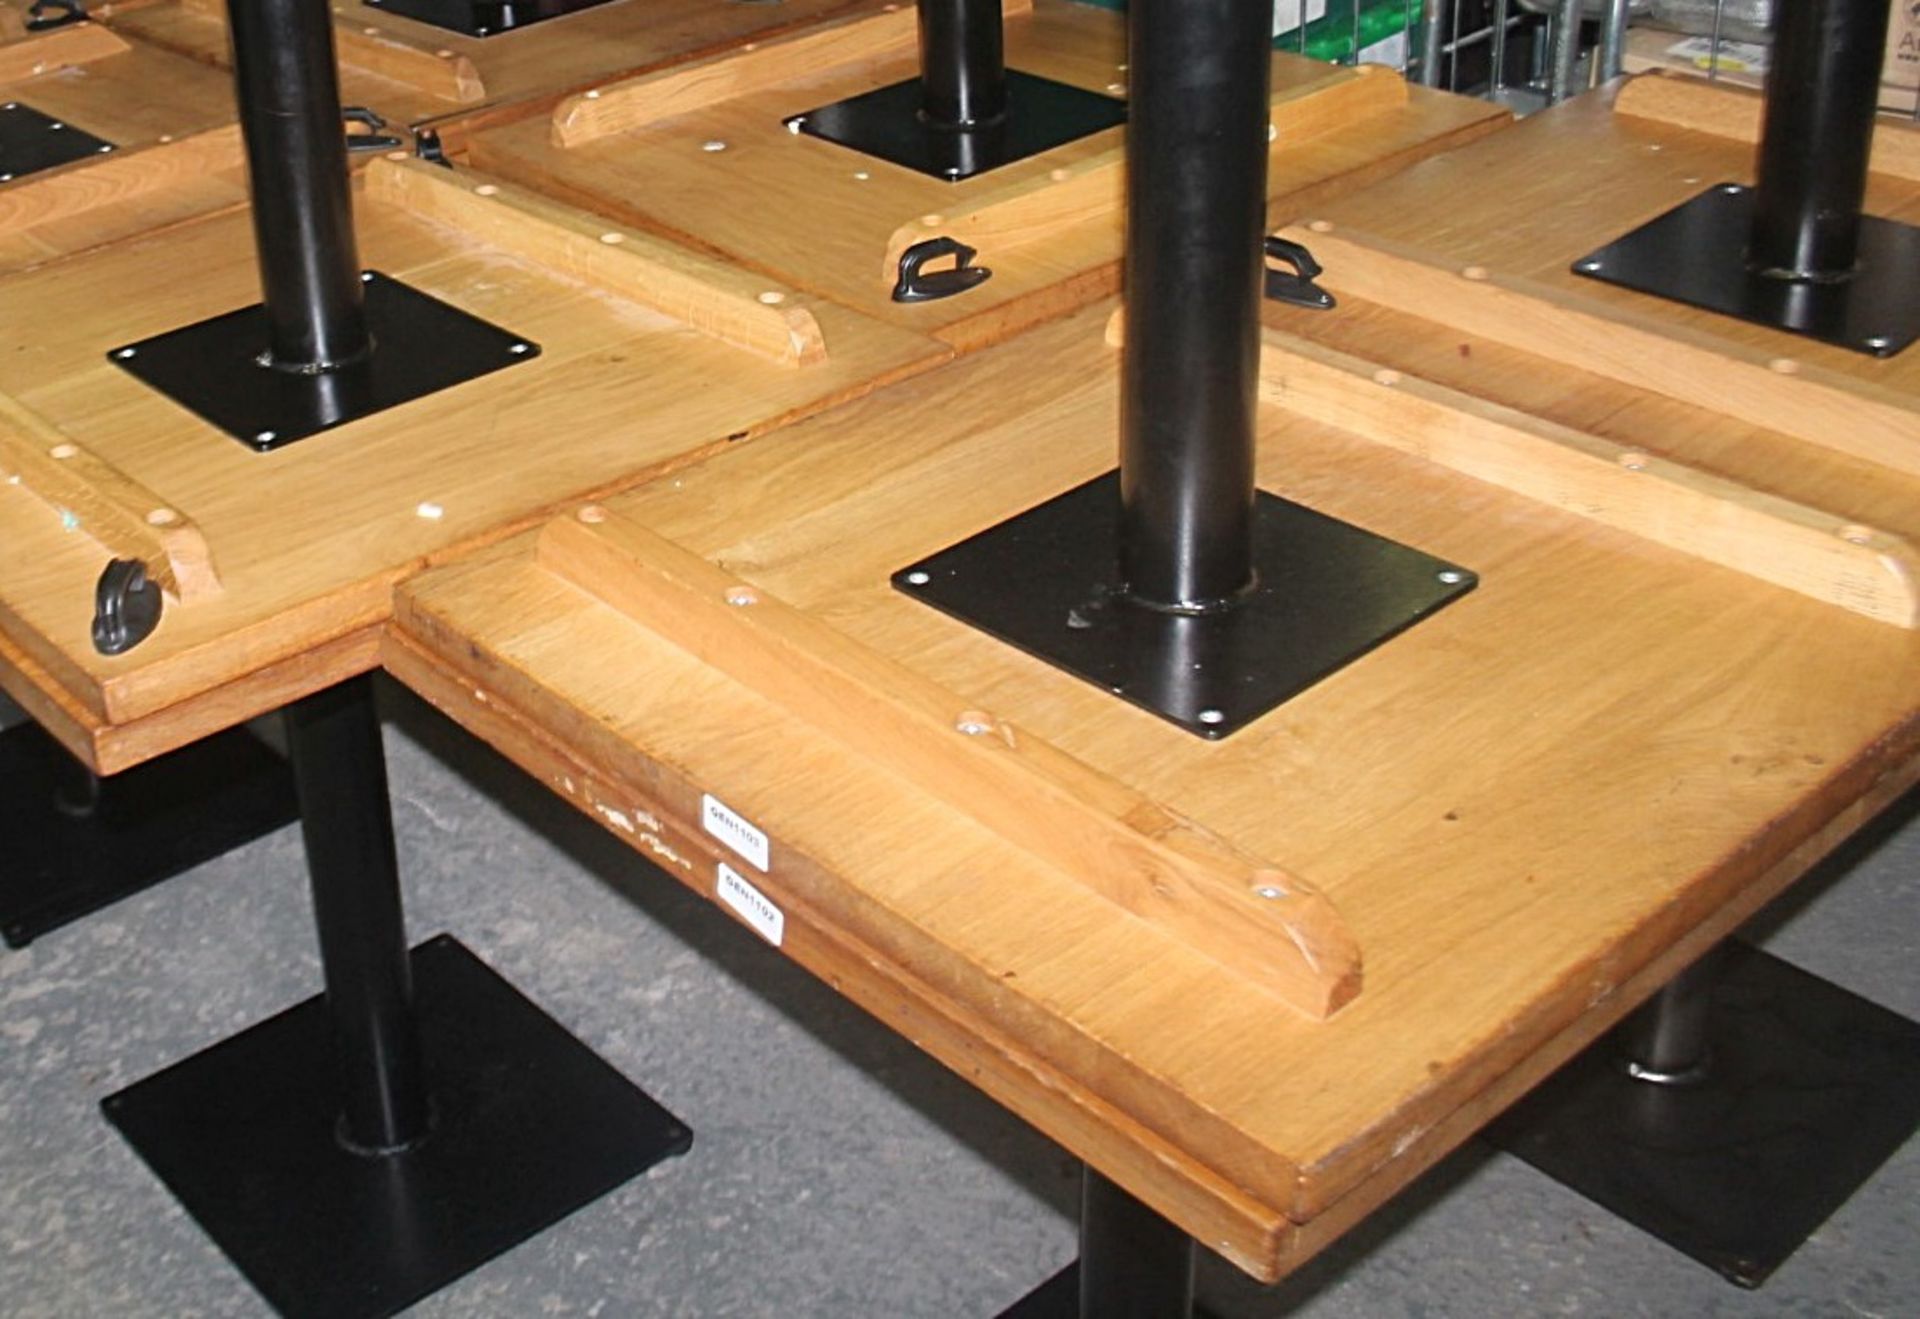 4 x Solid Oak Restaurant Dining Tables - Natural Rustic Knotty Oak Tops With Black Cast Iron Bases - - Image 7 of 7